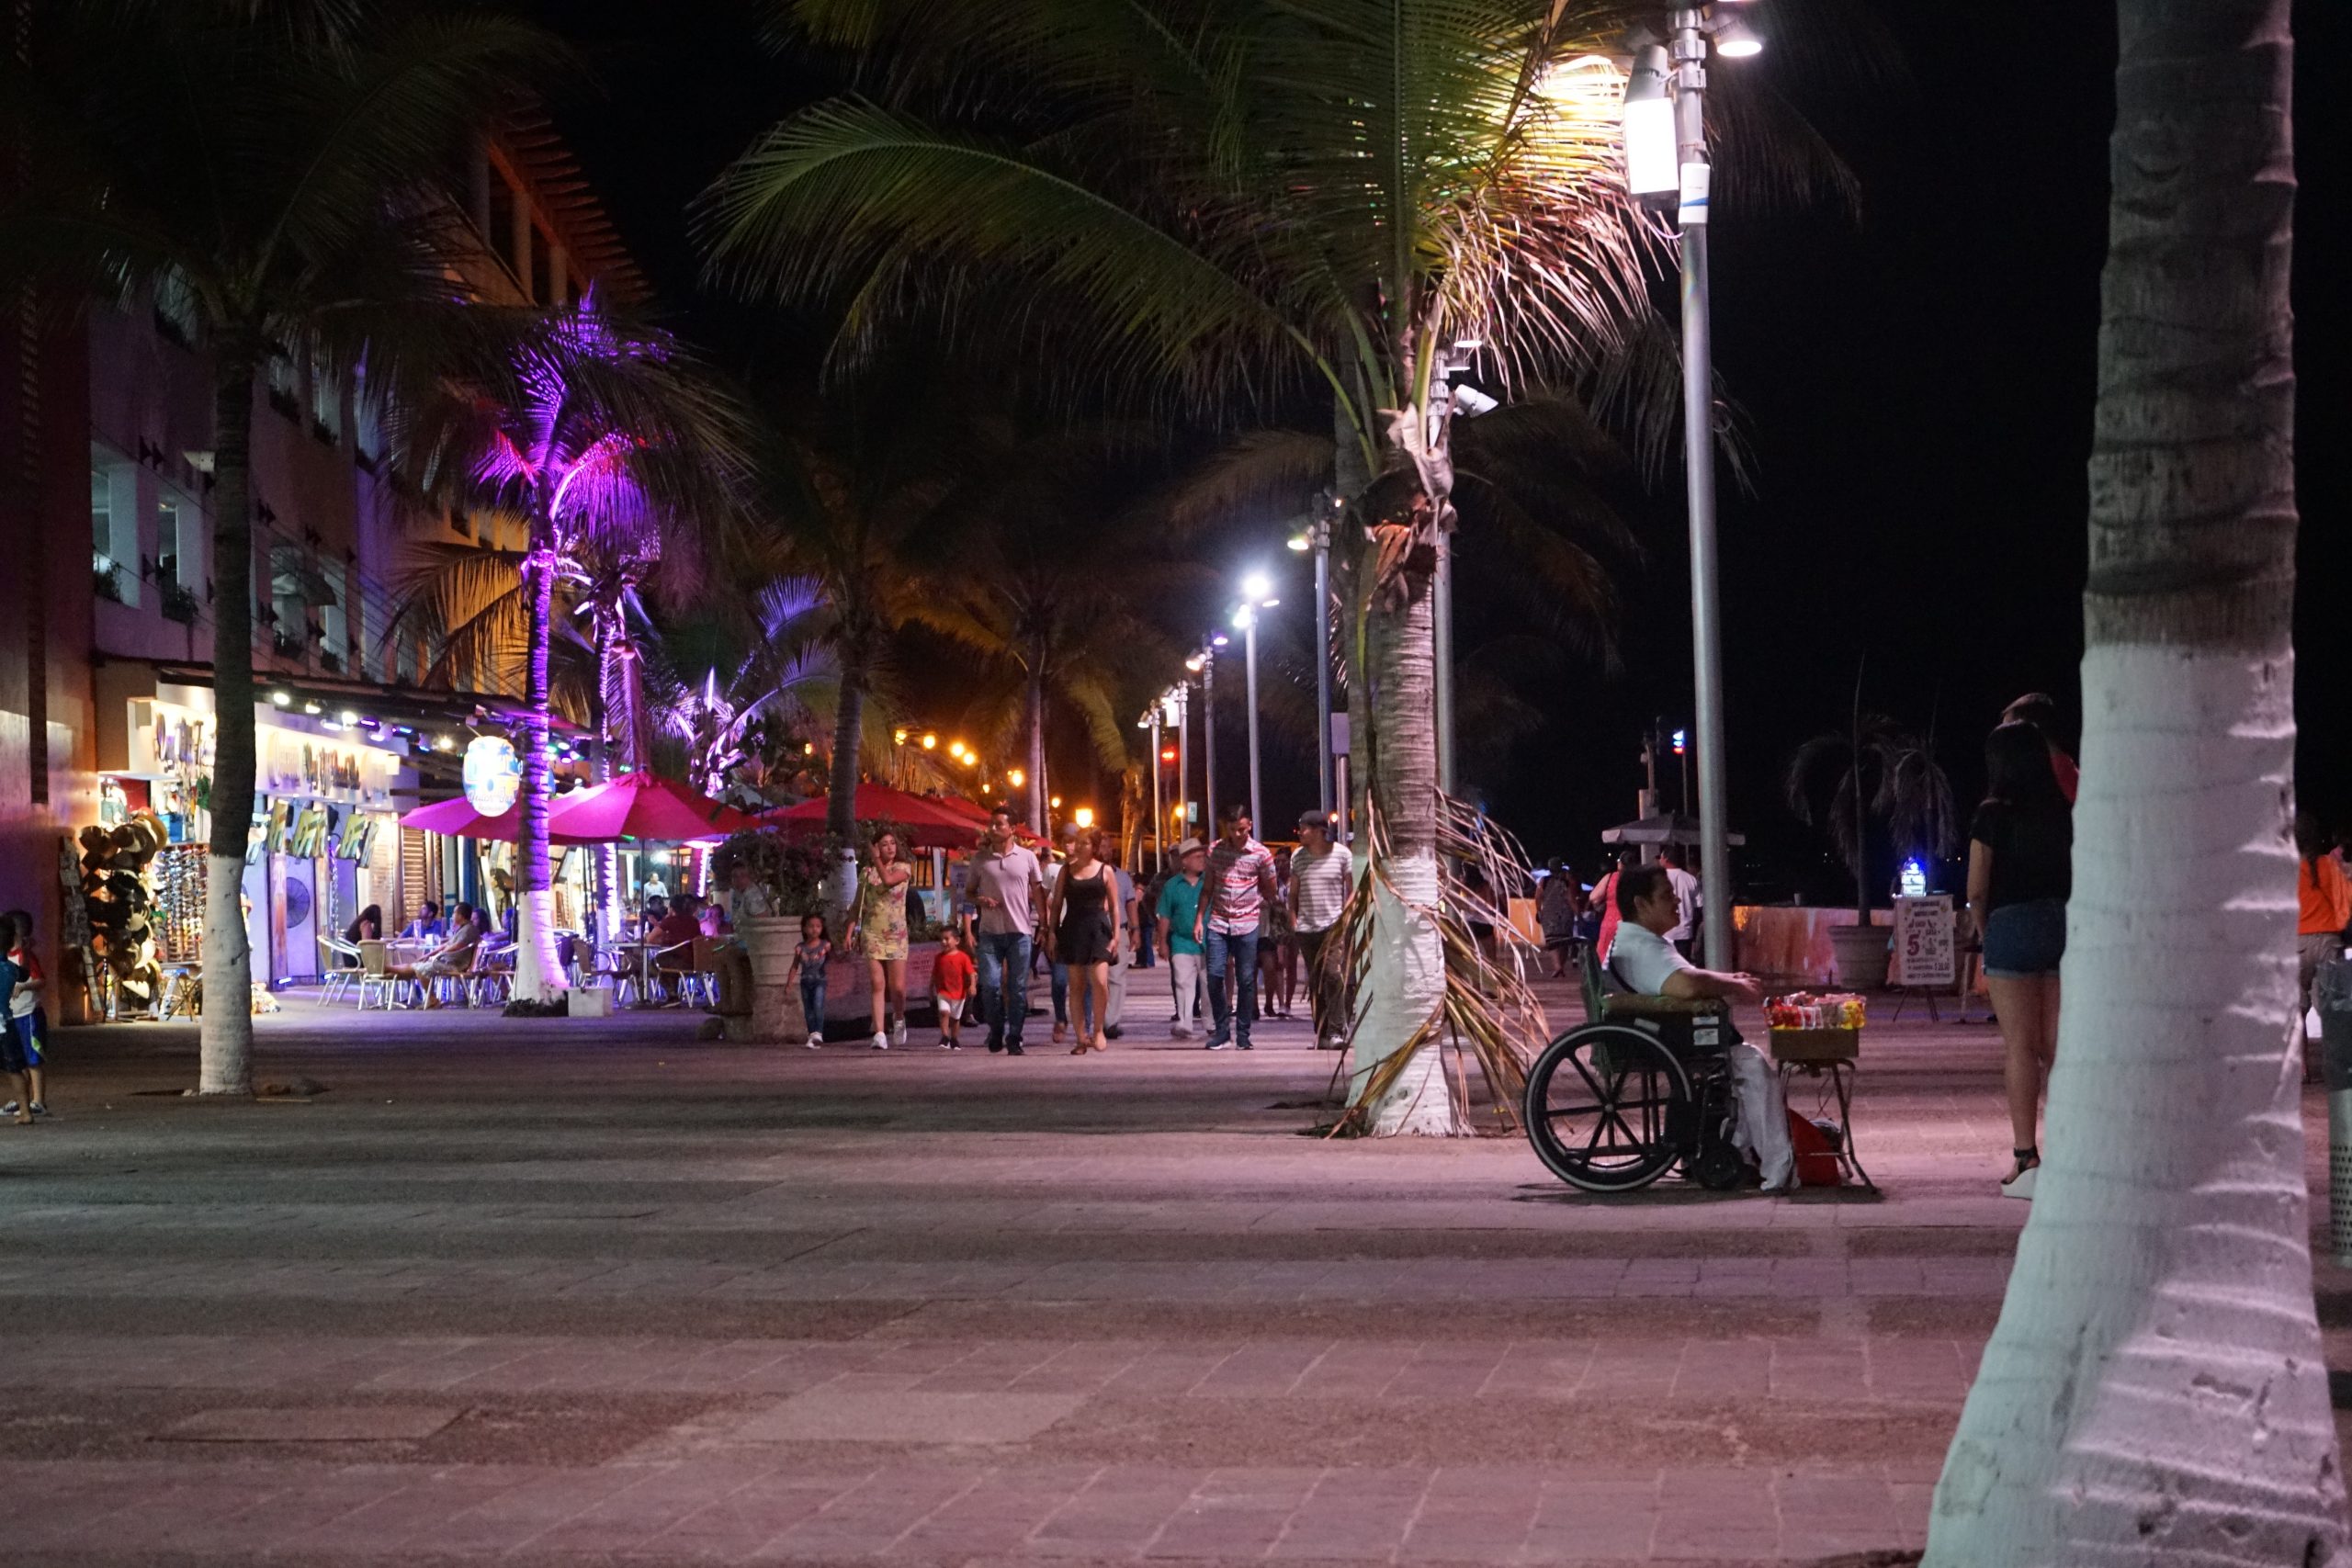 Puerto Vallarta's Malecon is a vibrant promenade that offers stunning ocean views and cultural experiences.